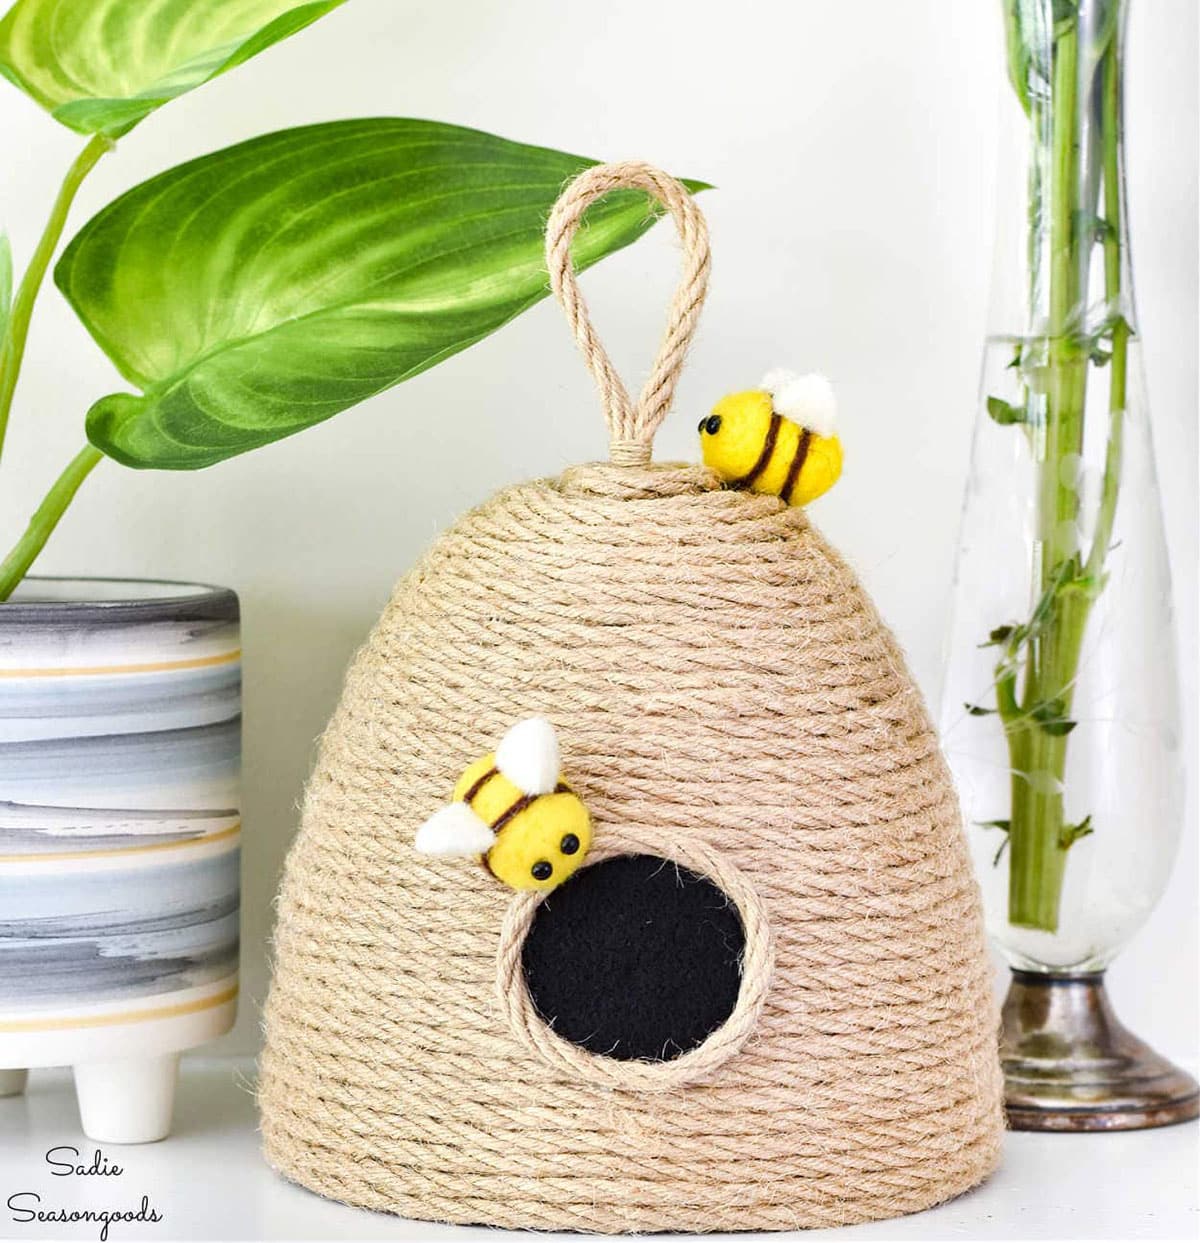 DIY bee hive decor piece made from glass light covering and jute rope.